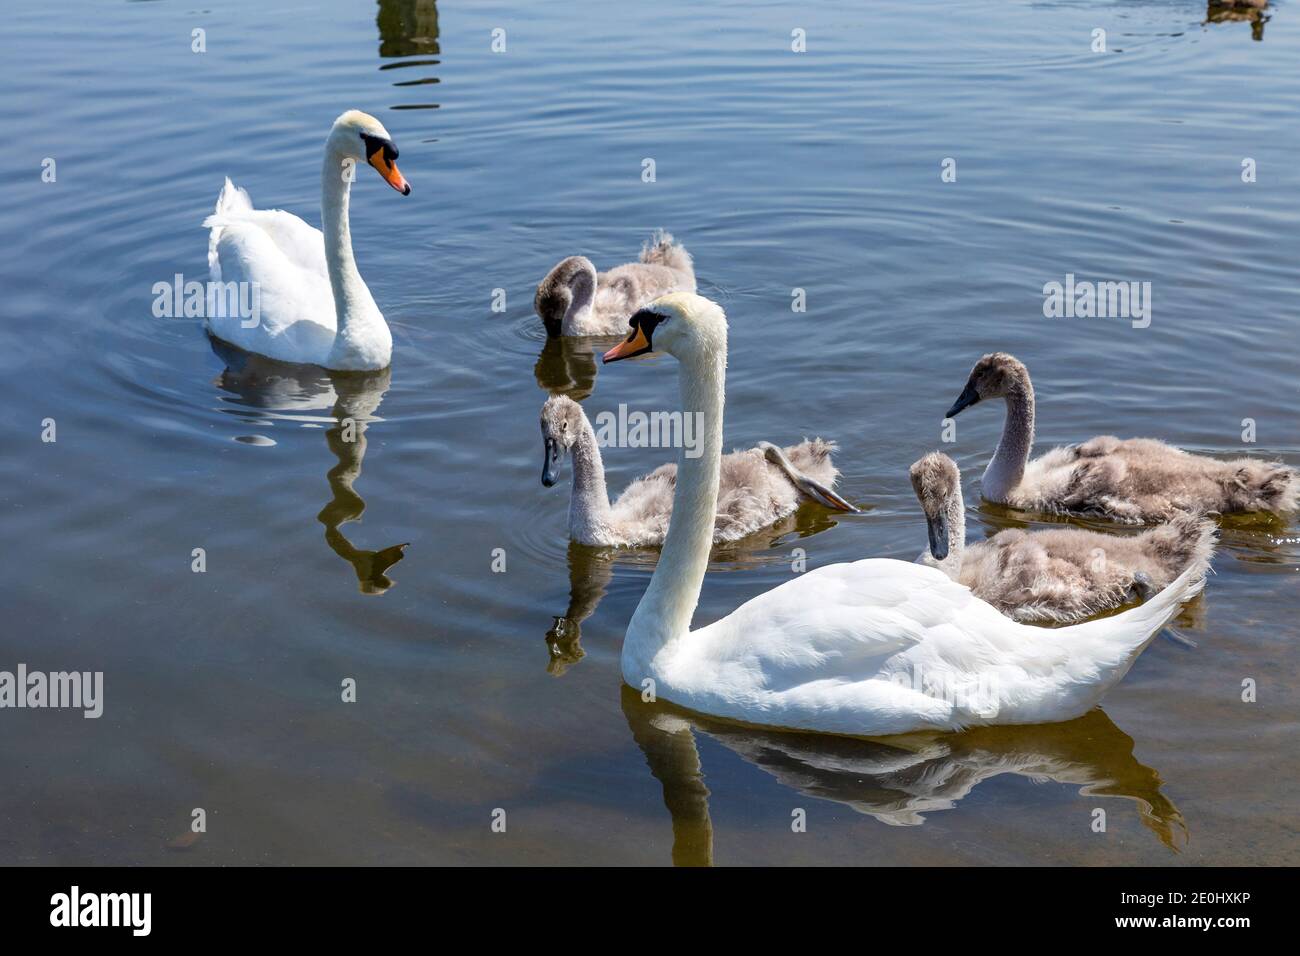 A family of swans on Serpentine Lake in Hyde Park, London, UK Stock Photo